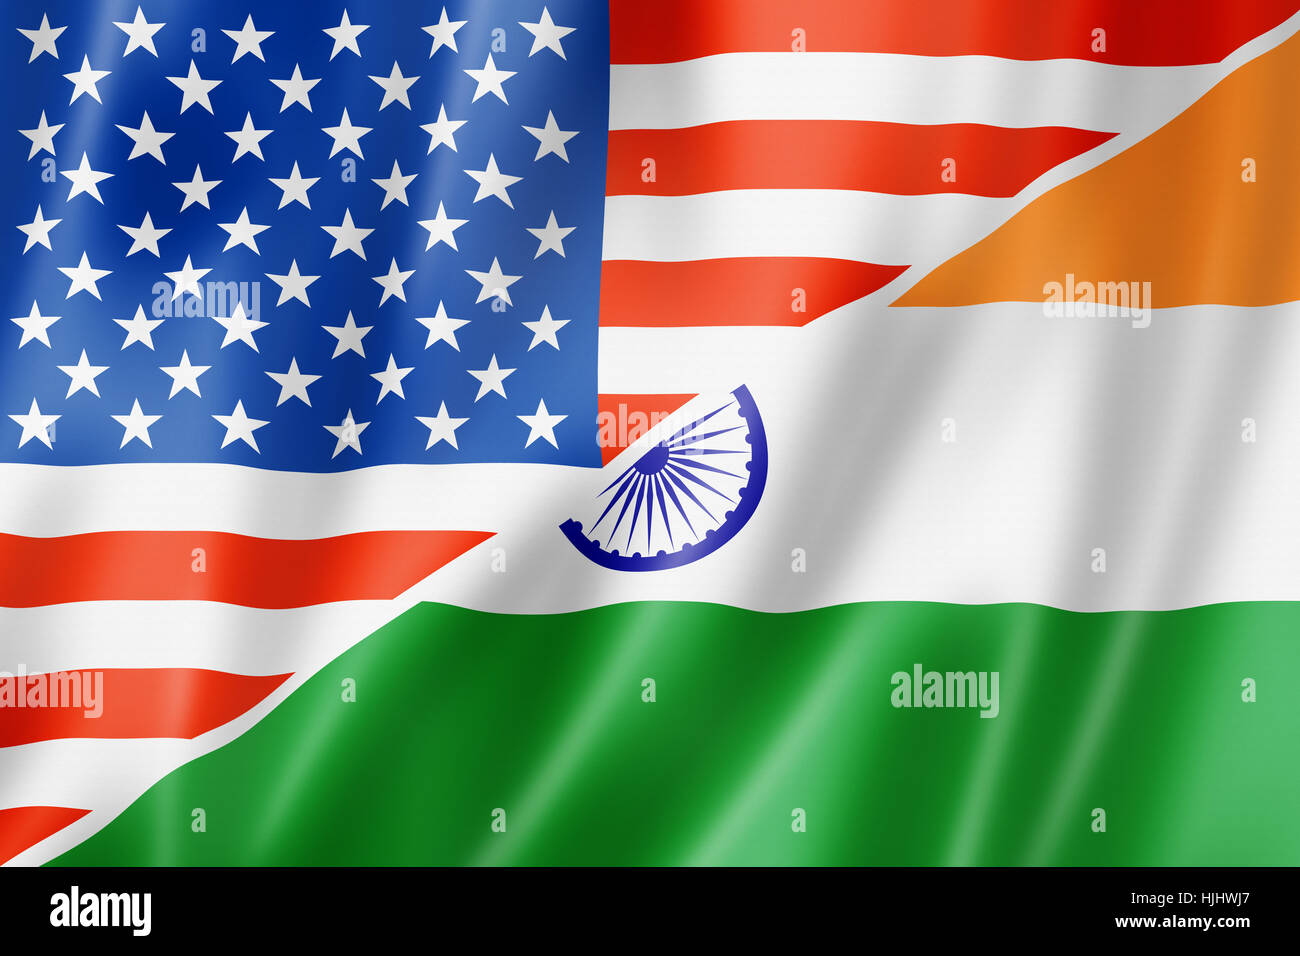 india, usa, america, flag, indian, travel, model, design, project, concept, Stock Photo